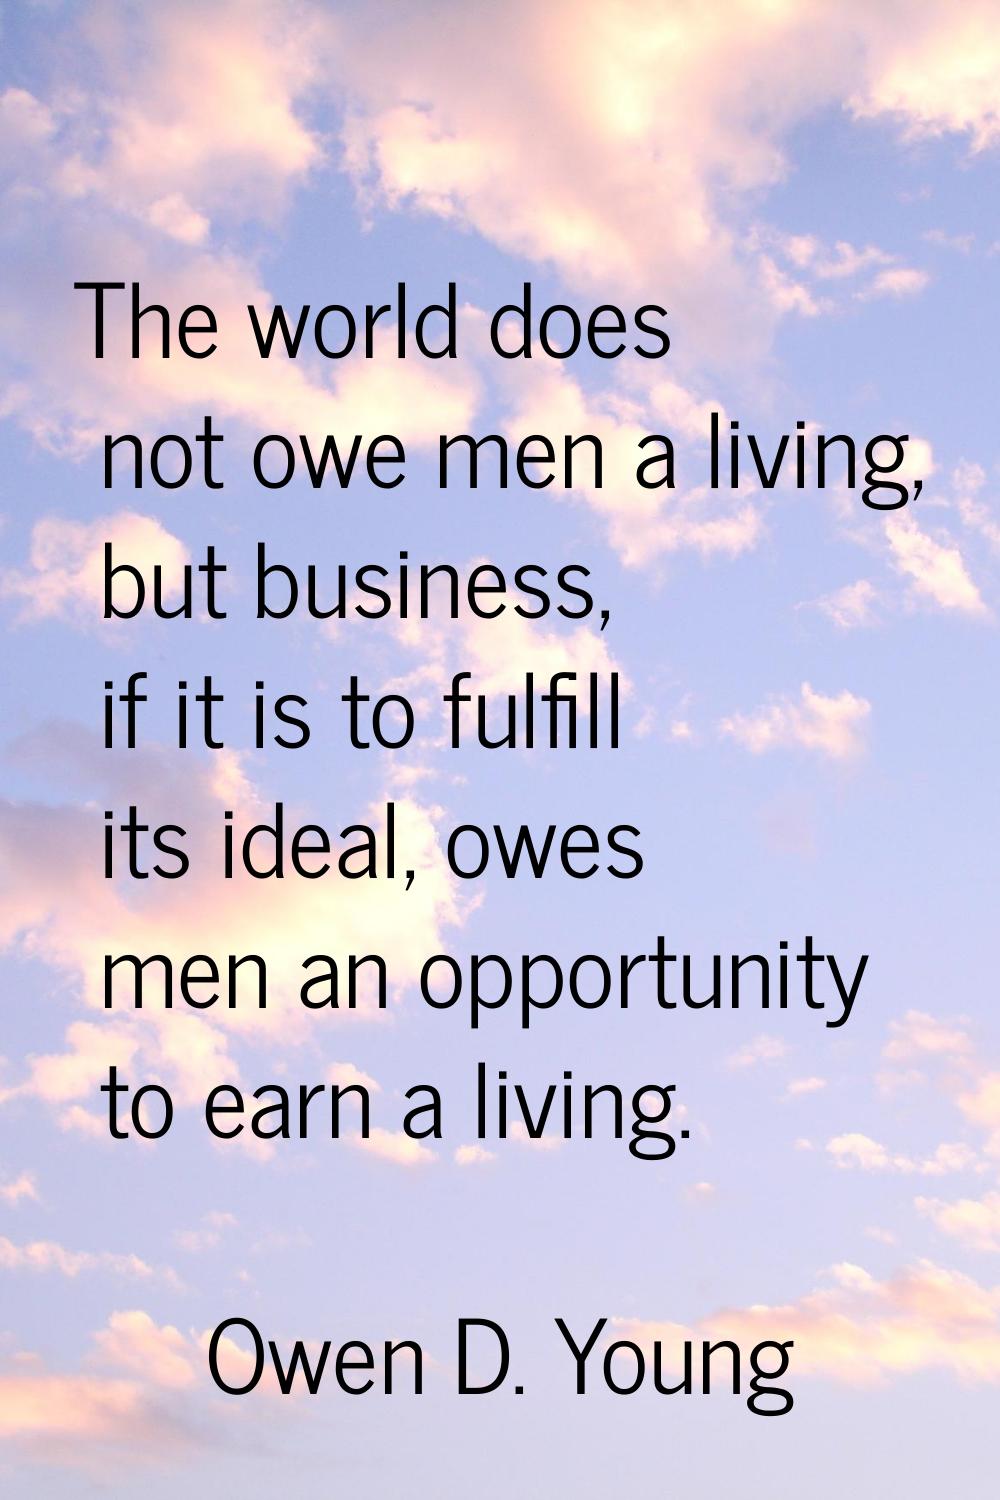 The world does not owe men a living, but business, if it is to fulfill its ideal, owes men an oppor